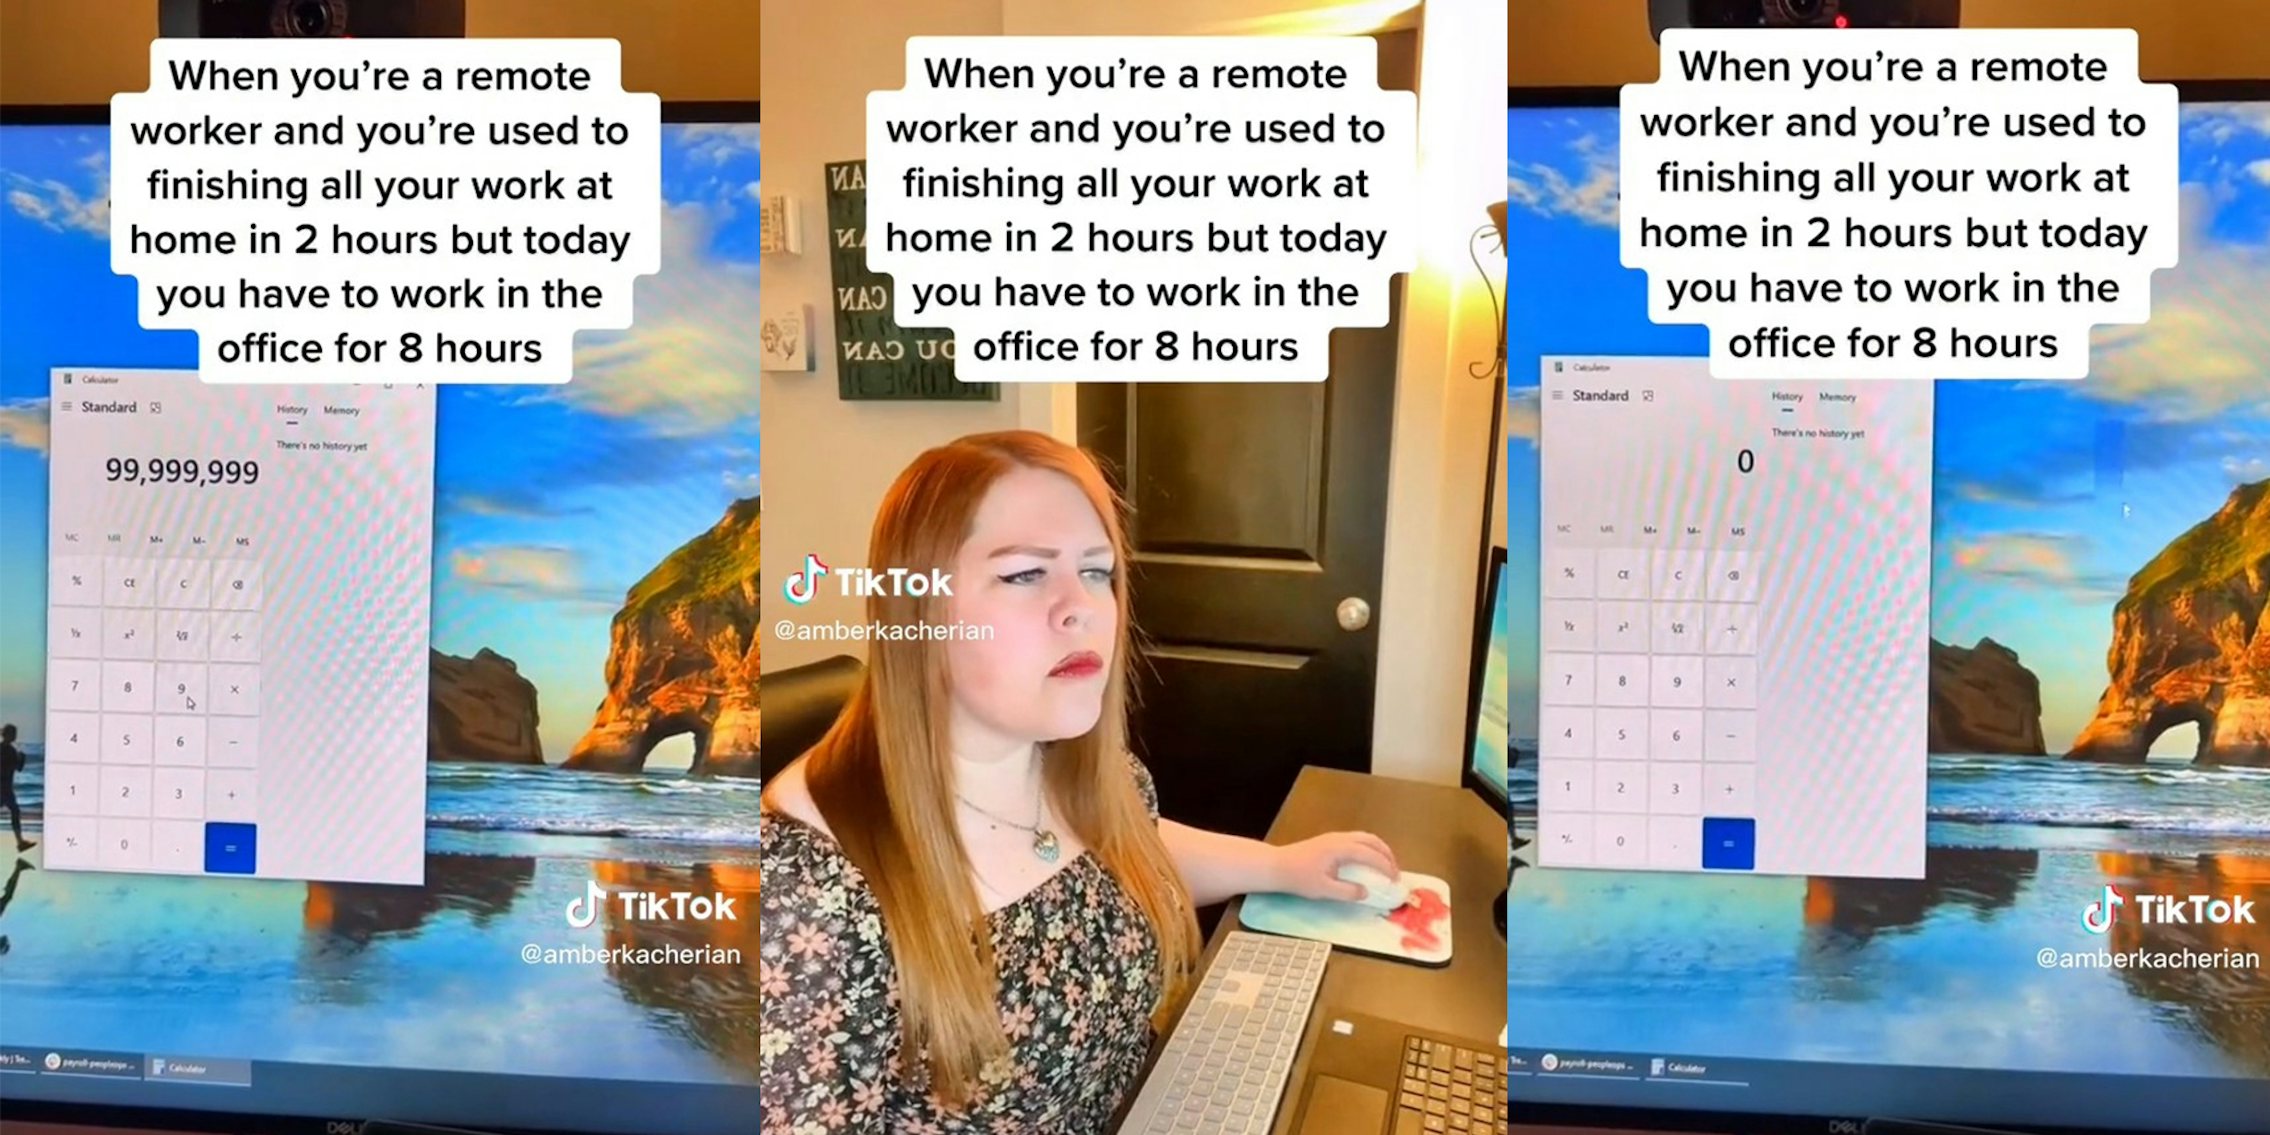 Remote worker who finishes work in 2 hours finds it difficult to spend 8 hours in office